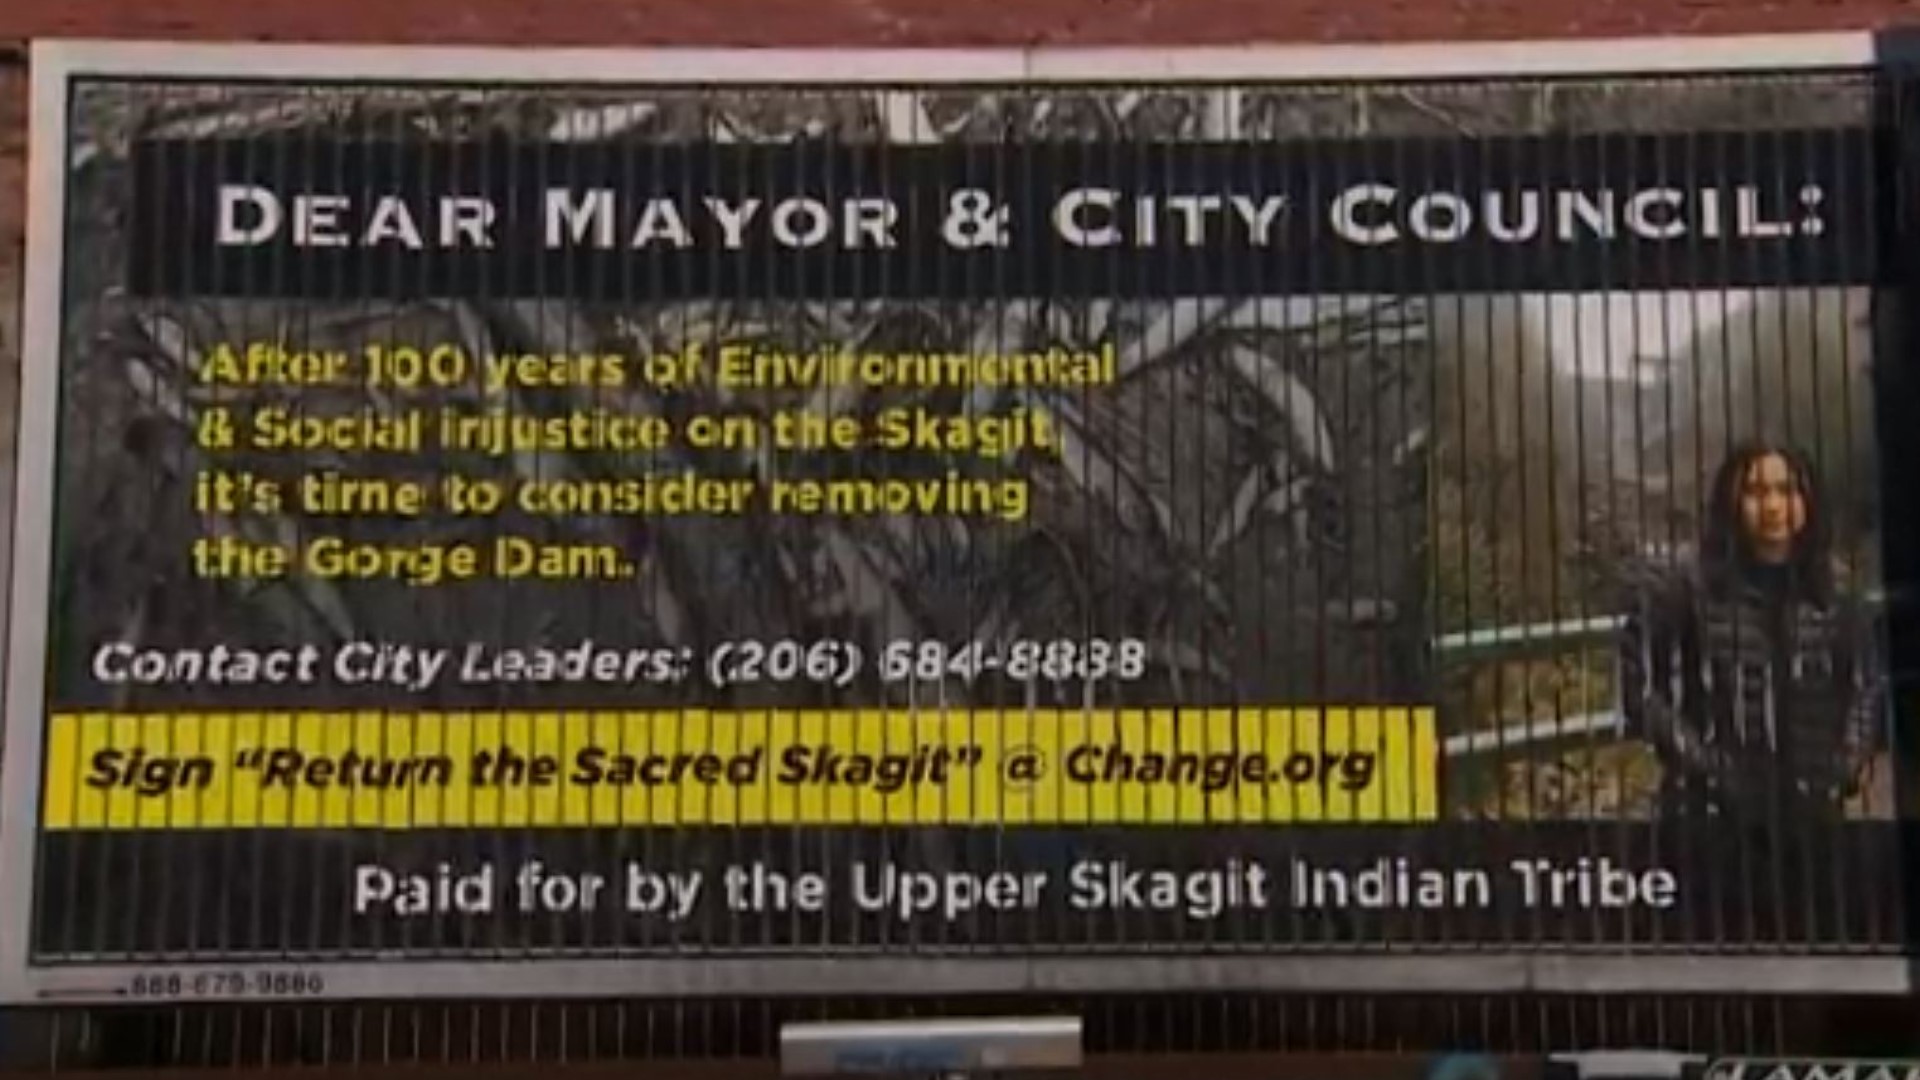 The Upper Skagit Indian Tribe says they were "forced" into buying a billboard to pressure the city to consider removing Gorge Dam on the Skagit River.